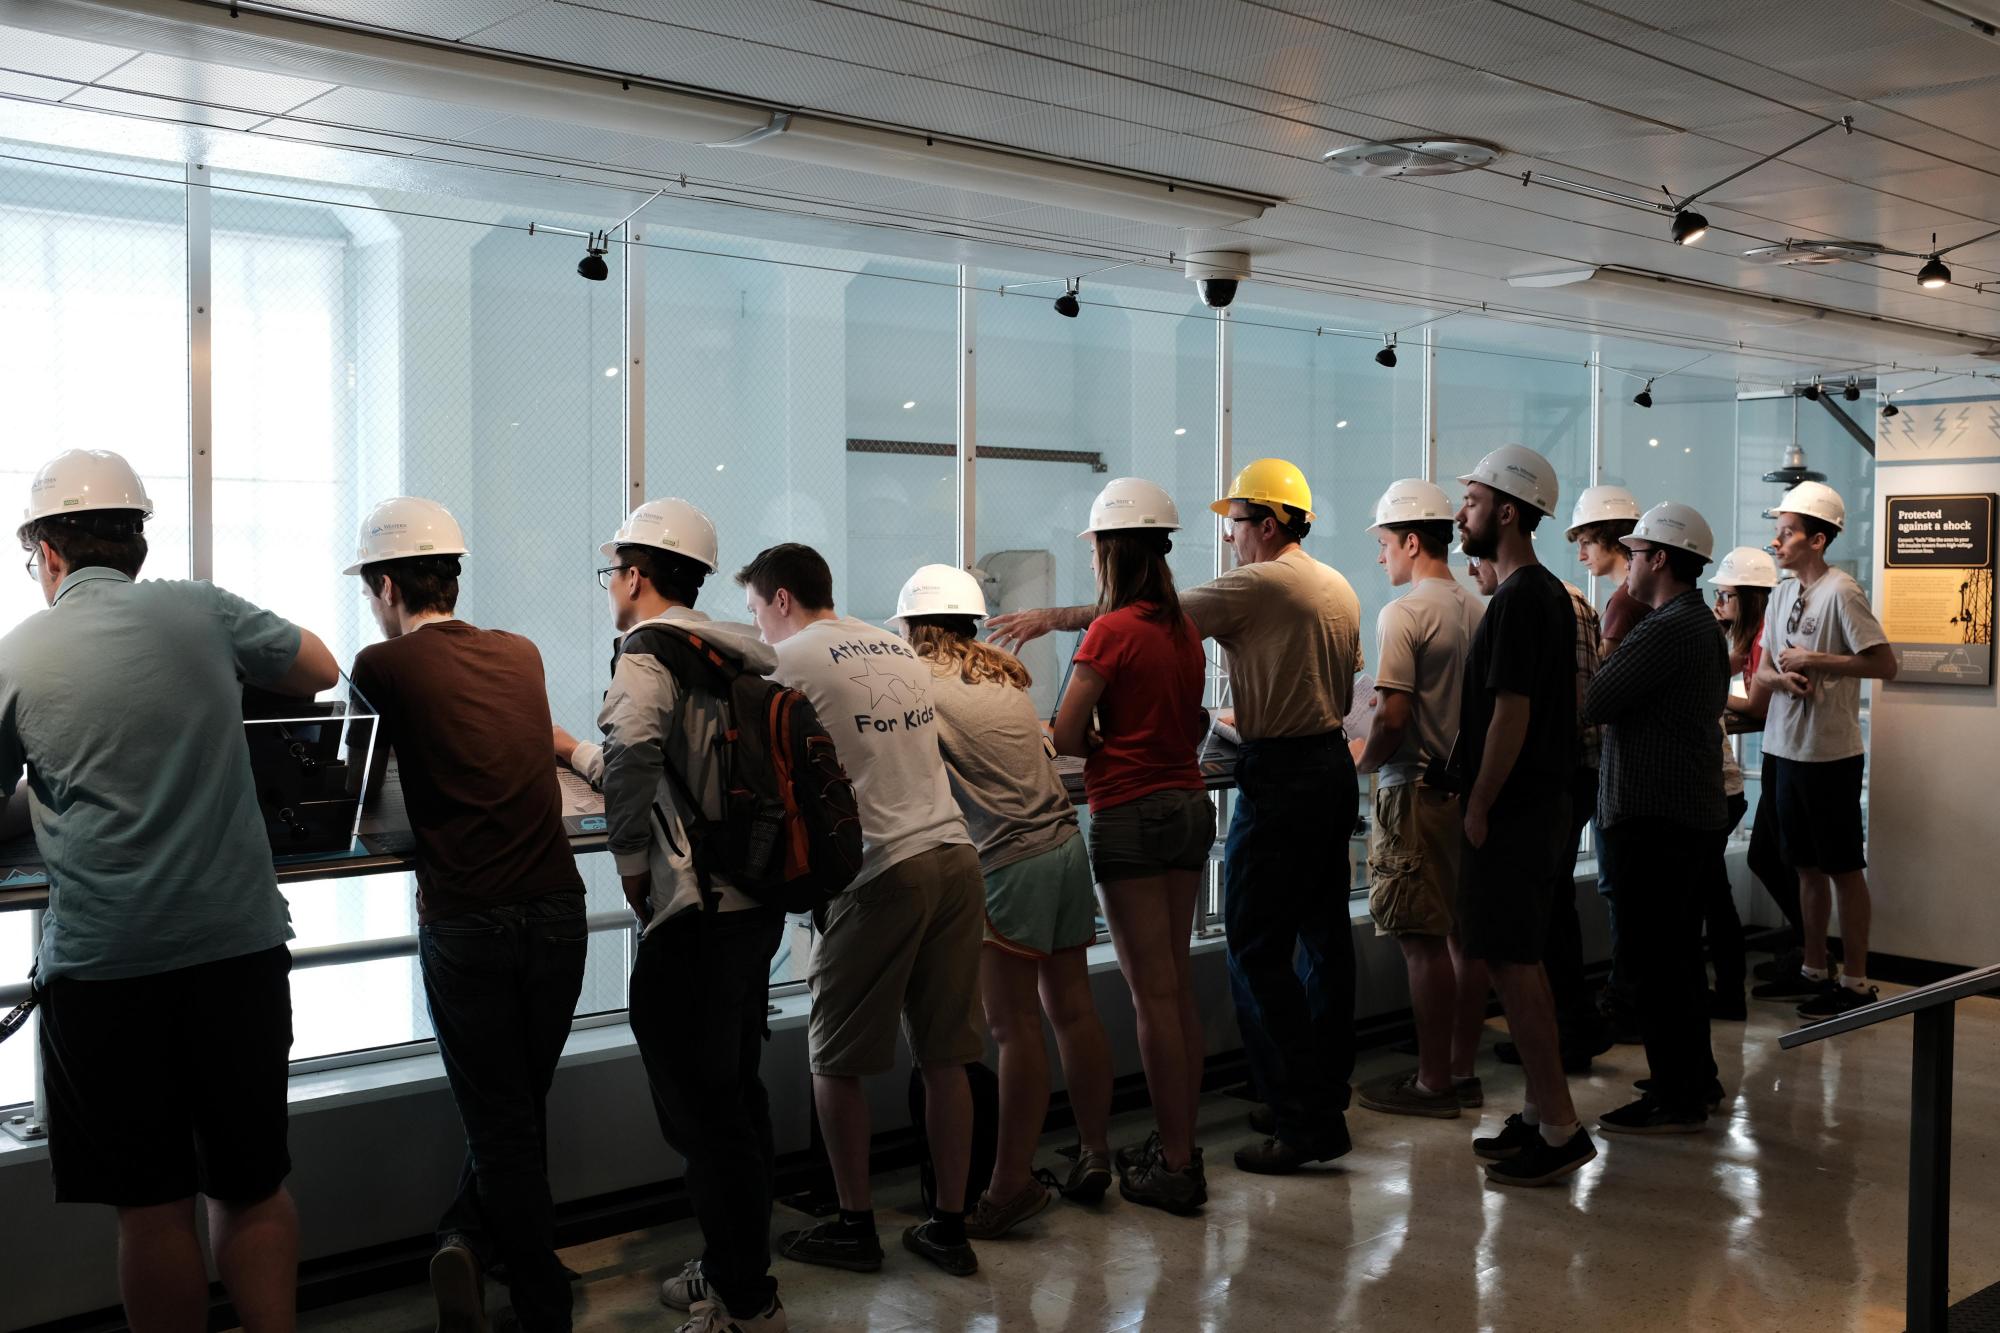 Students wear hard hats and look over a balcony